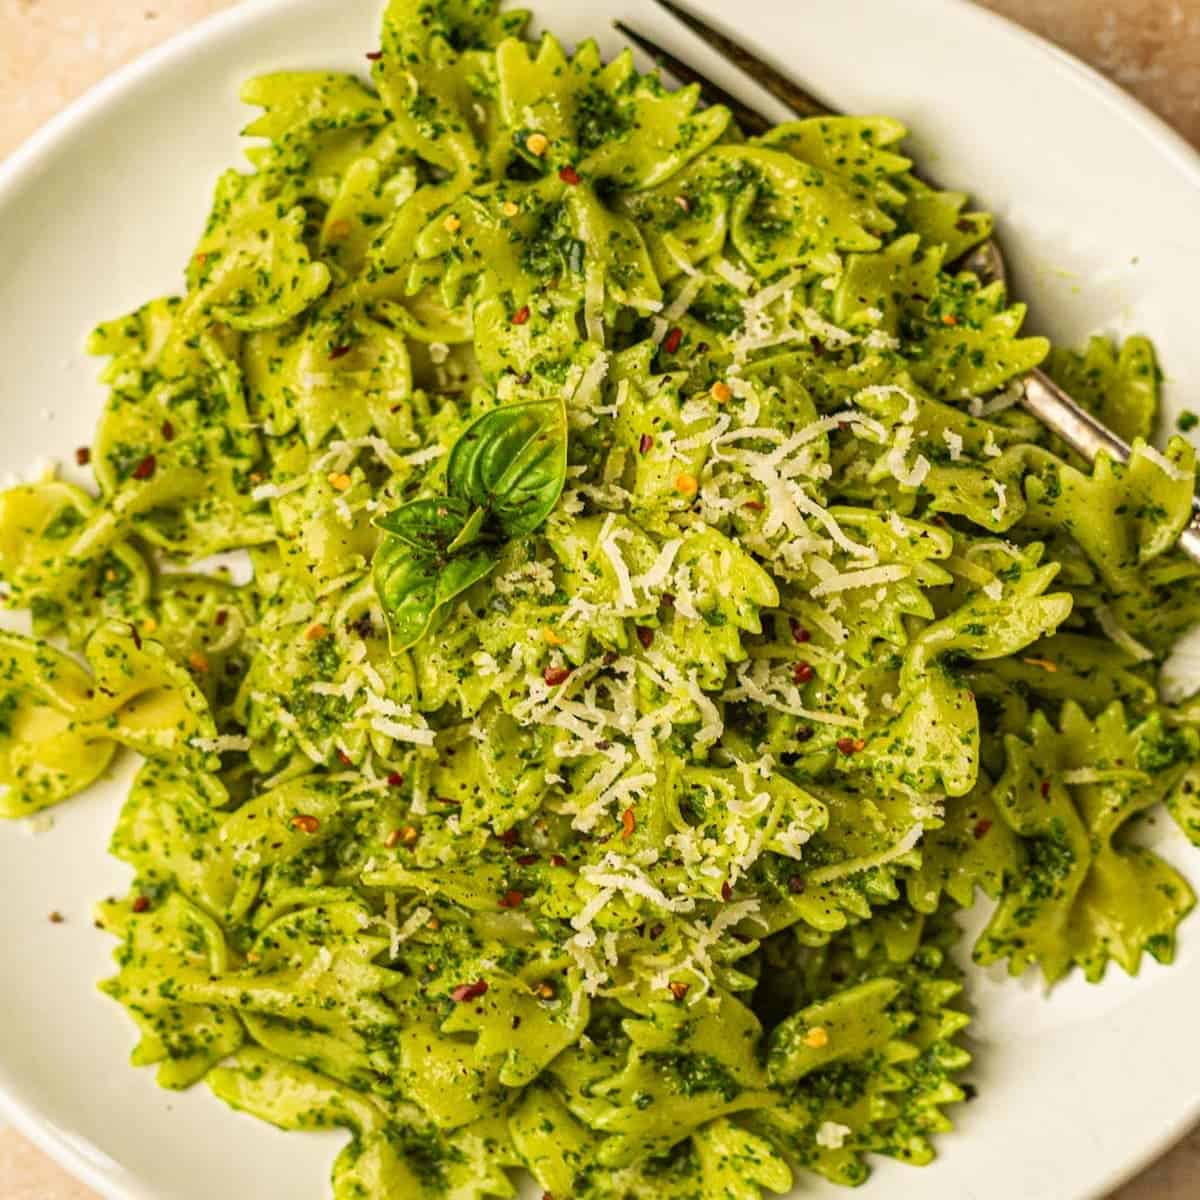 Bow tie pasta tossed with a nut-free pesto